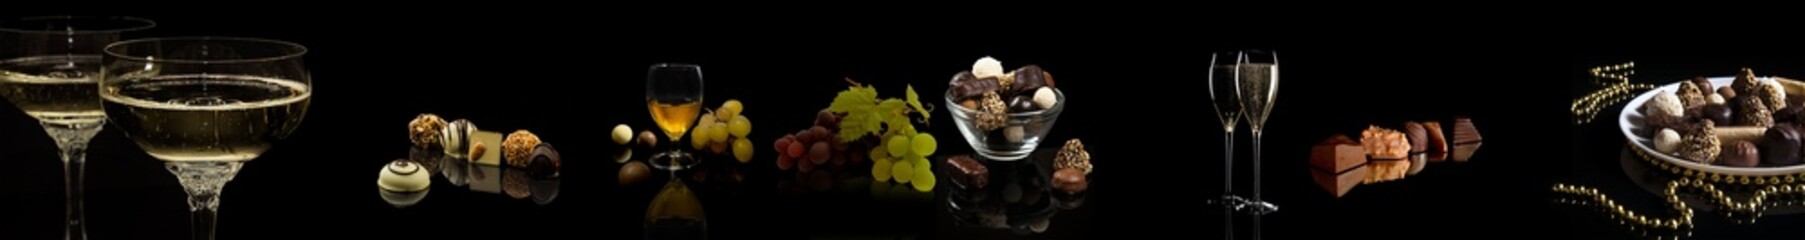 Candies with wine and grapes on a black background